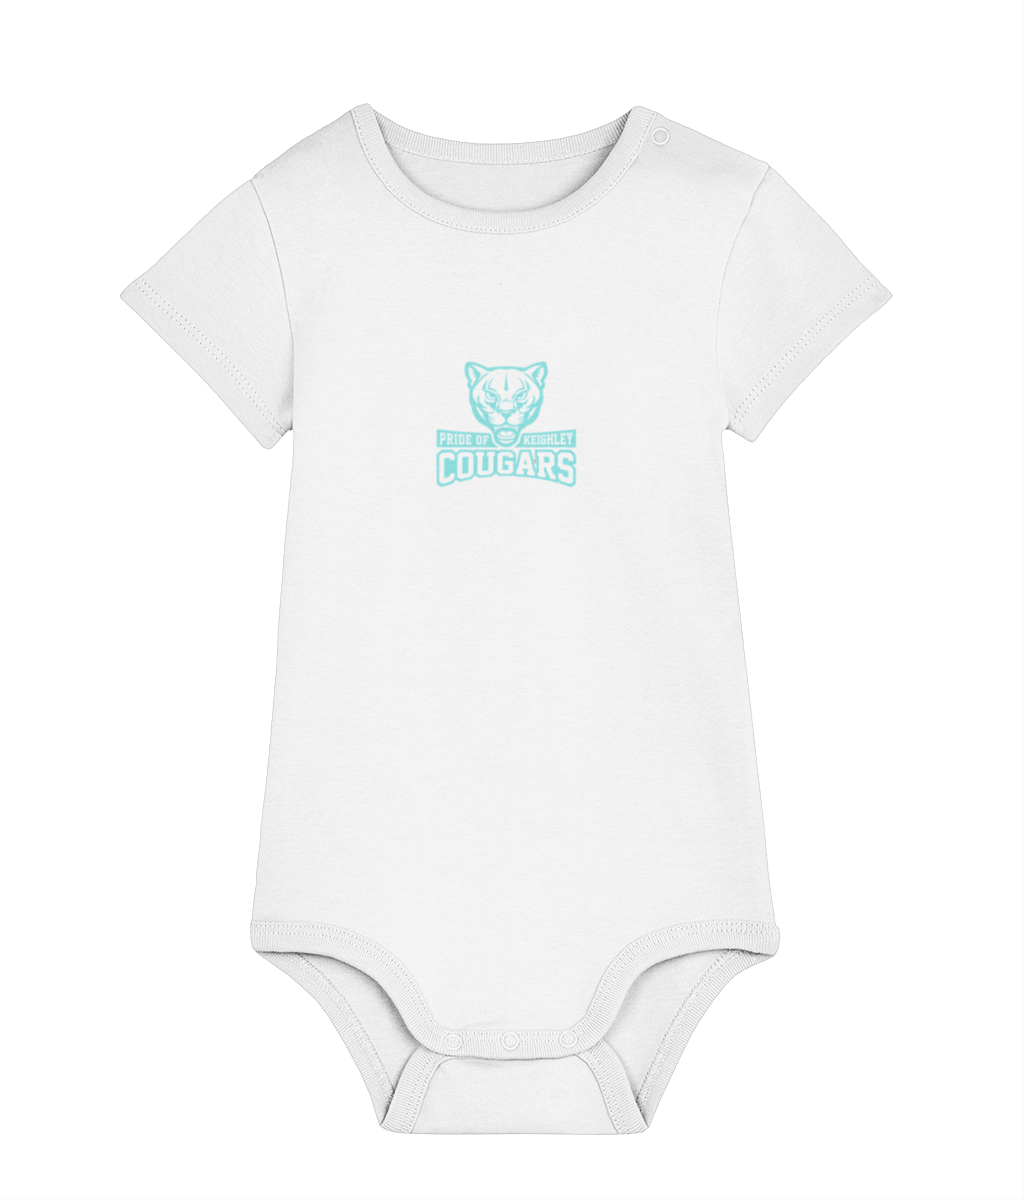 Keighley Cougars Blue Baby Body Suit in White